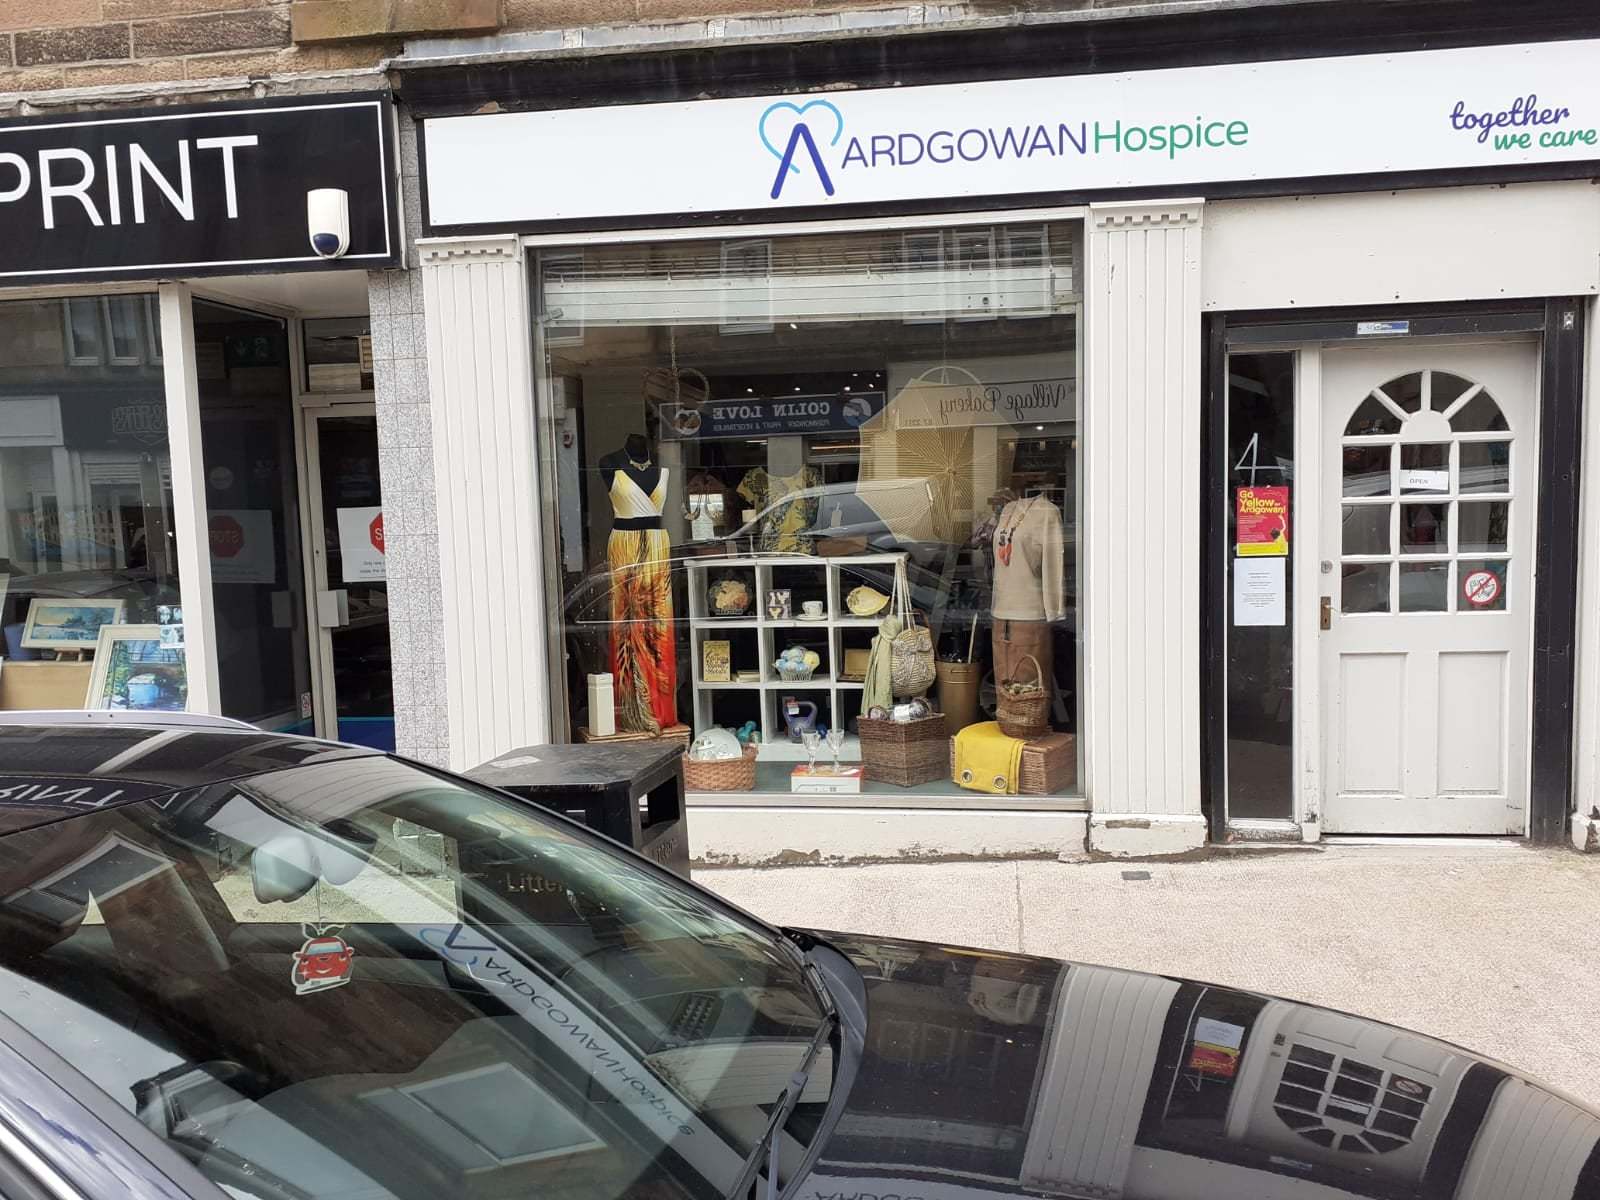 Ardgowan charity shops in need of donations